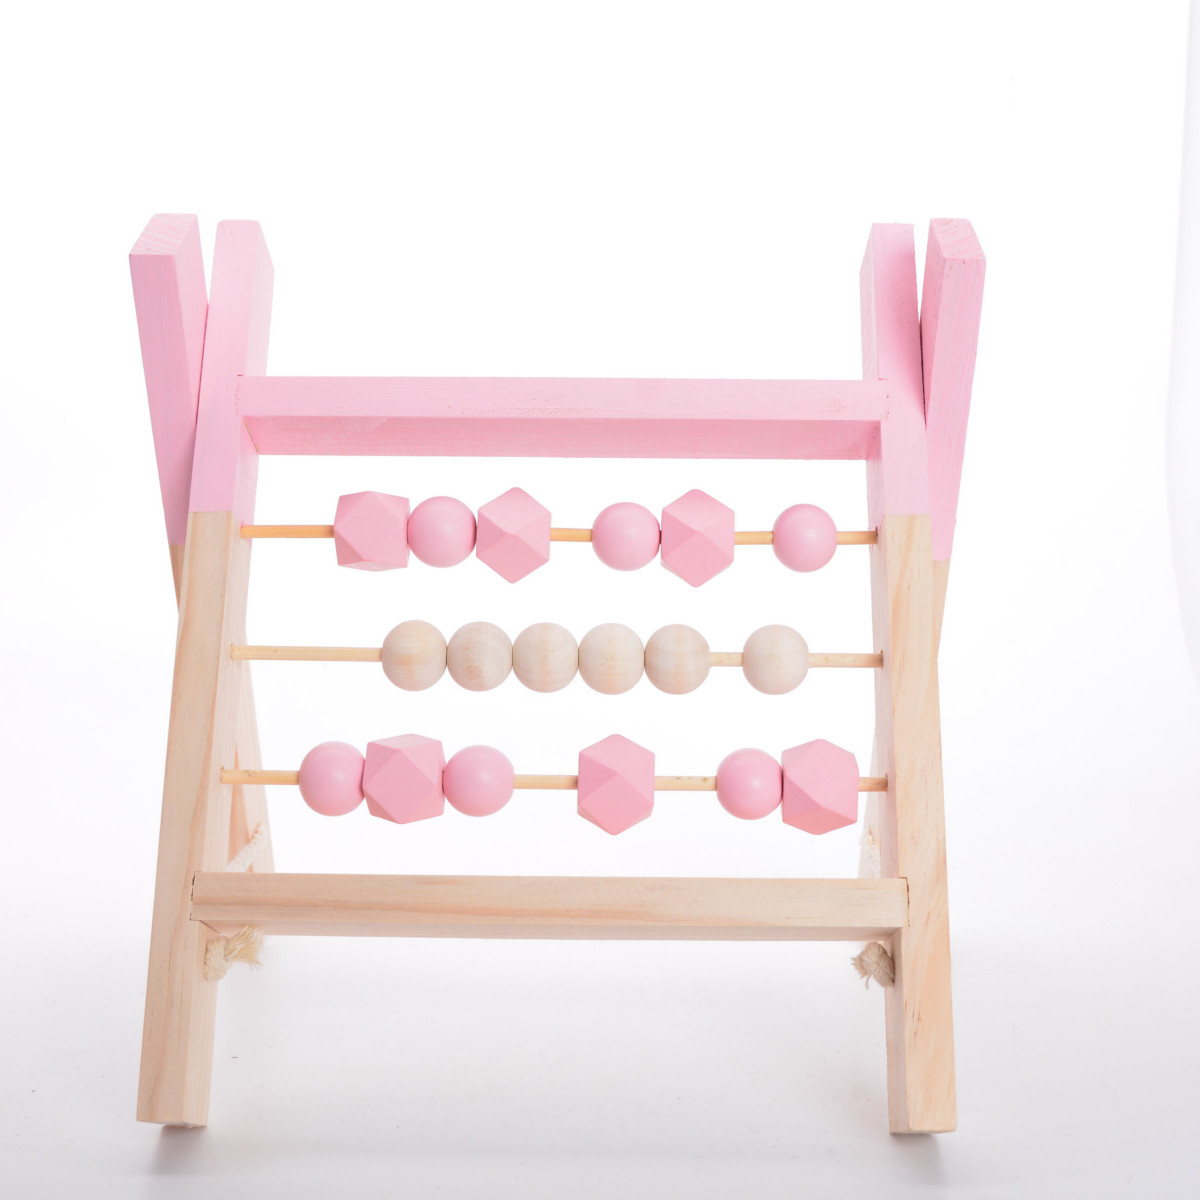 Natural-Pine-Nordic-Baby-Room-Decor-Wooden-Abacus-Educational-Nursery-Props-Toys-1581036-6